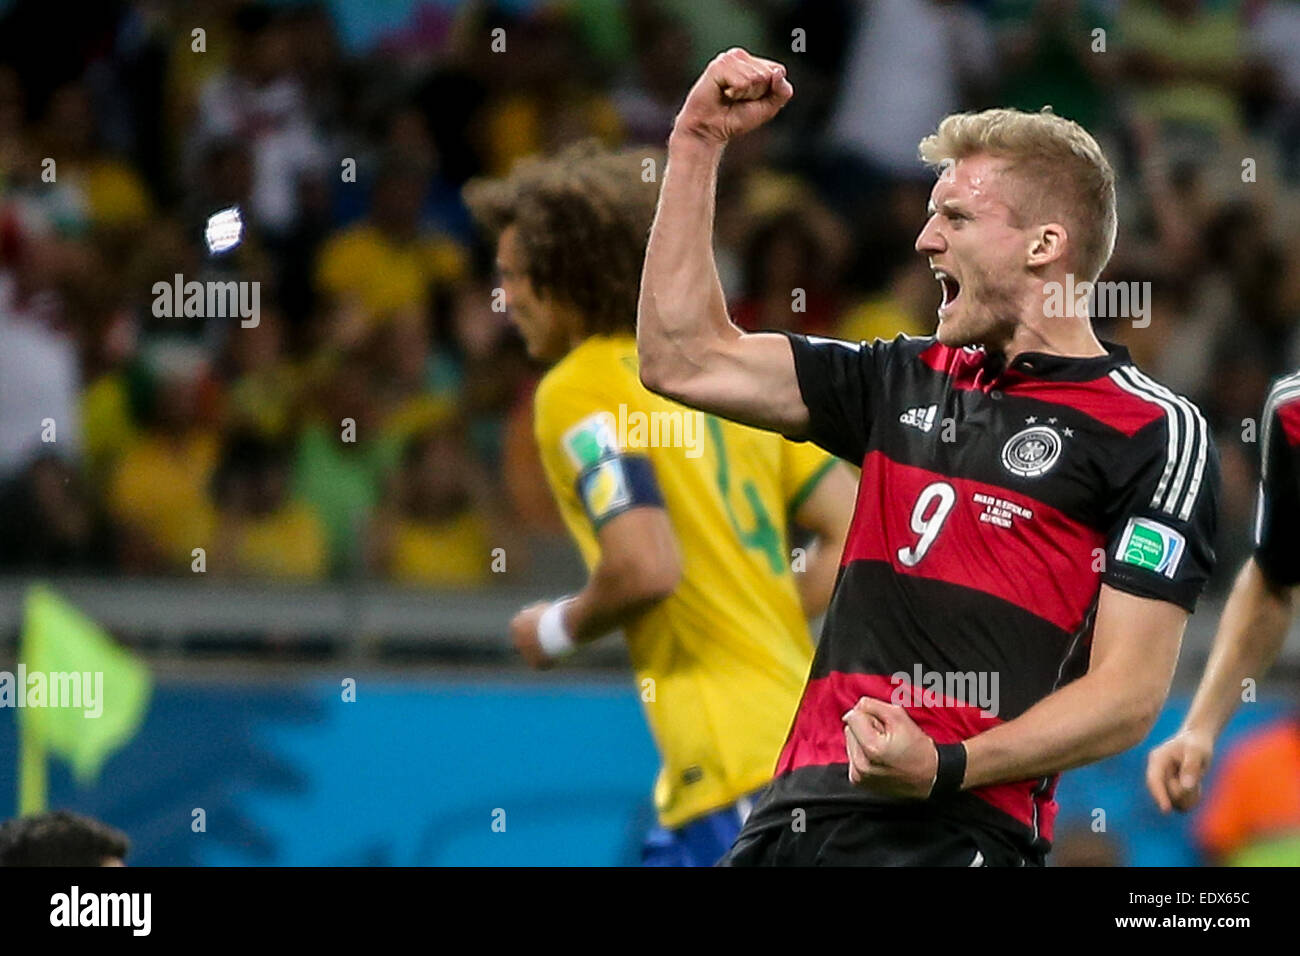 2014 FIFA World Cup semi-final match - Brazil v Germany (1-7) held at Belo Horizonte  Featuring: Andre Schurrle Where: Belo Horizonte, Brazil When: 08 Jul 2014 Stock Photo